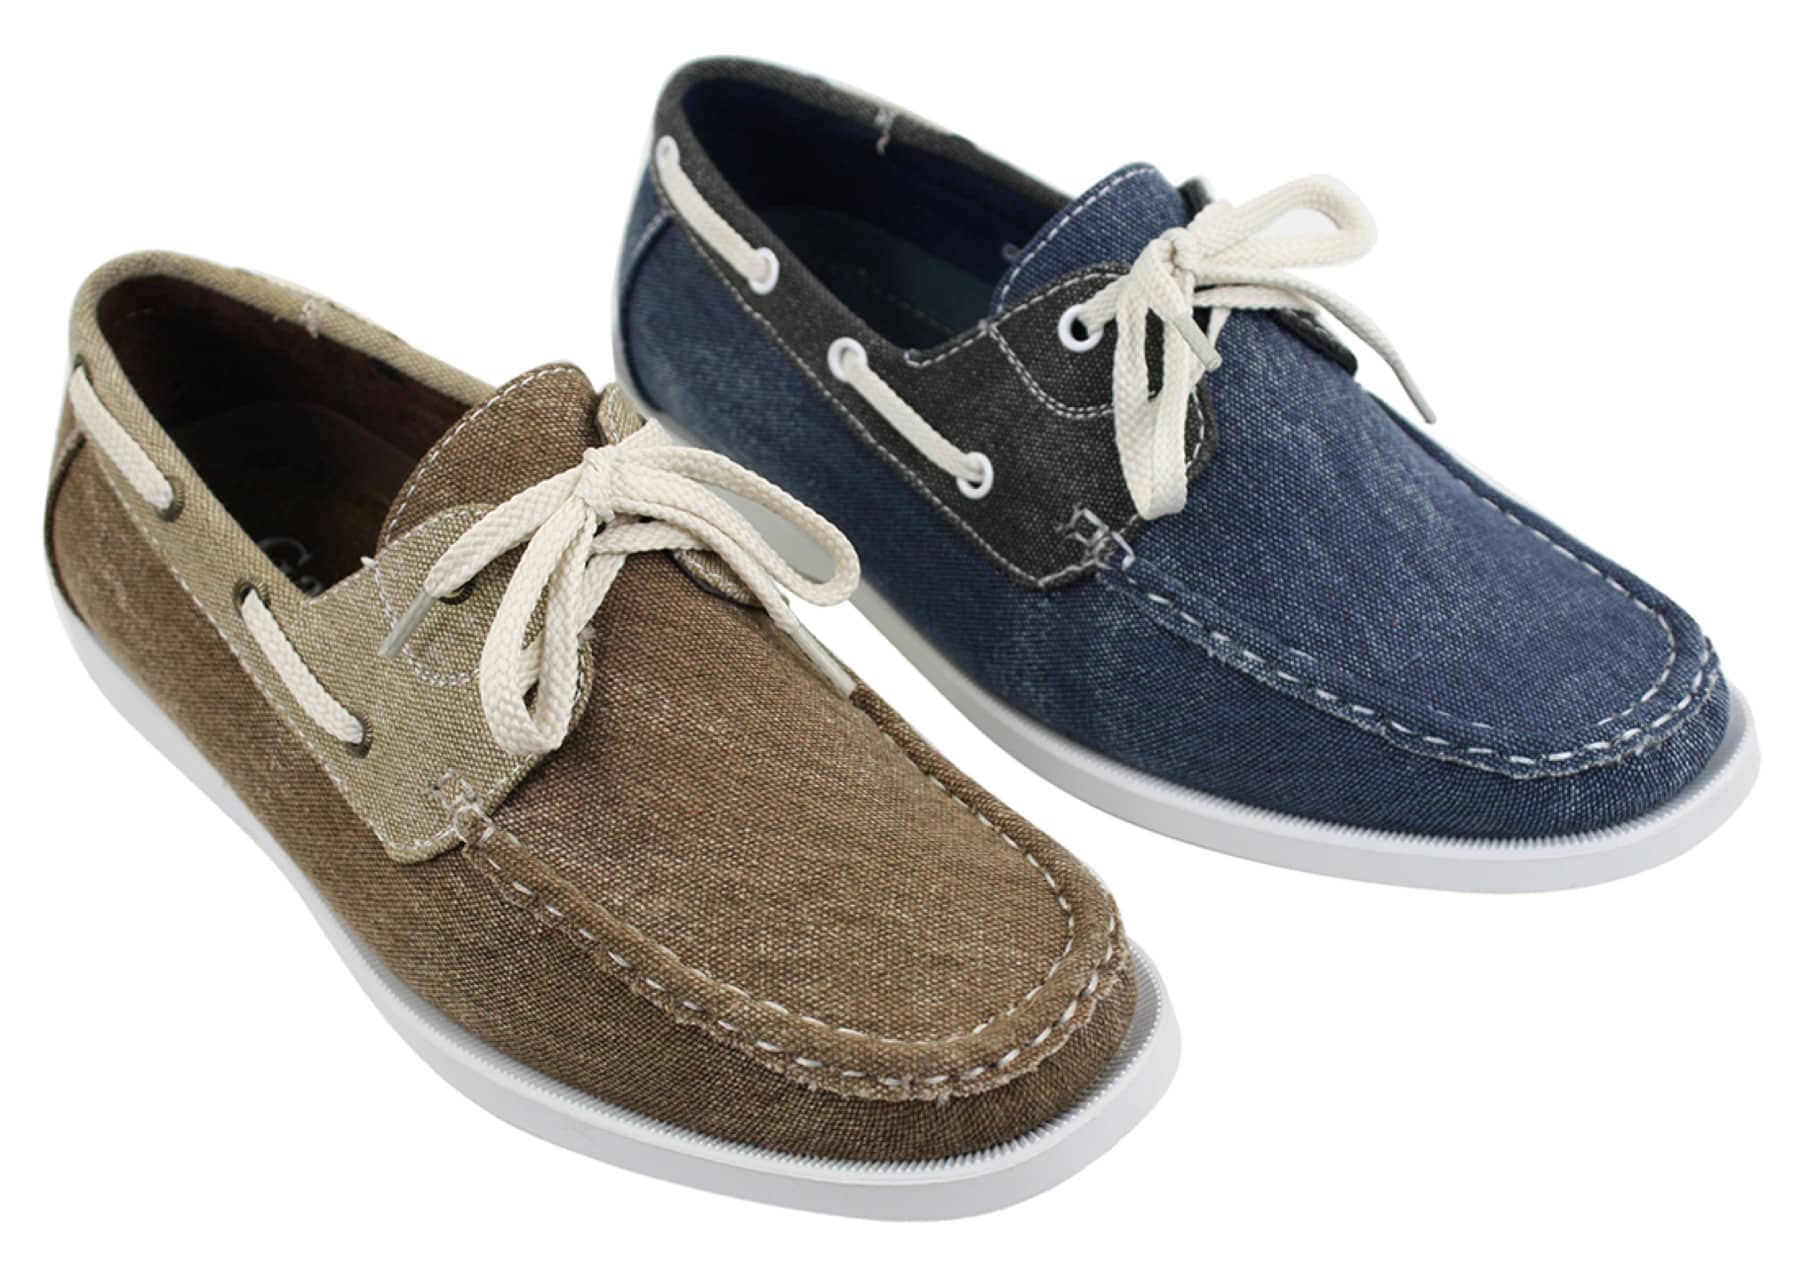 Mens Denim Canvas Retro Laced Moccasin Boat Deck Shoes Washed Navy ...